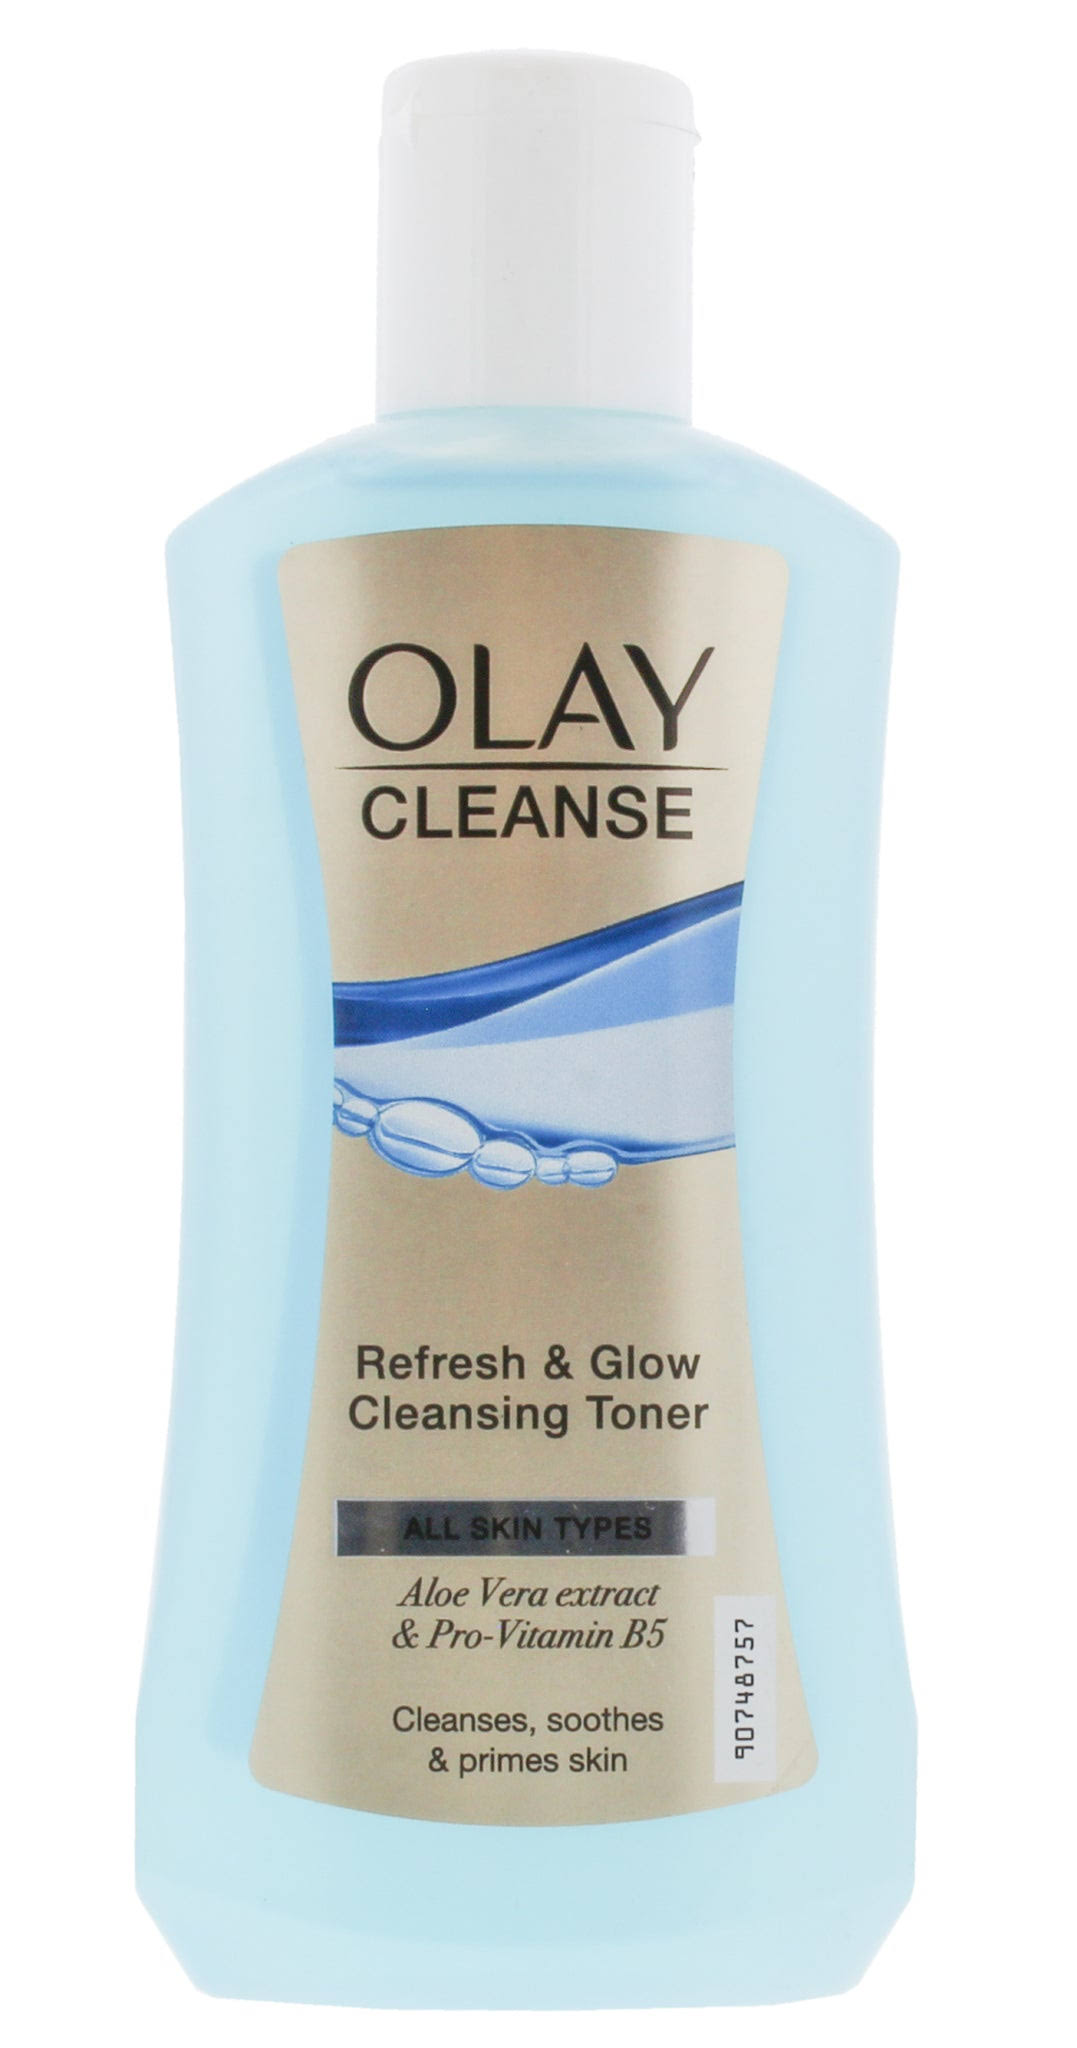 Olay Cleanse Refresh & Glow Cleansing Toner - 200ml